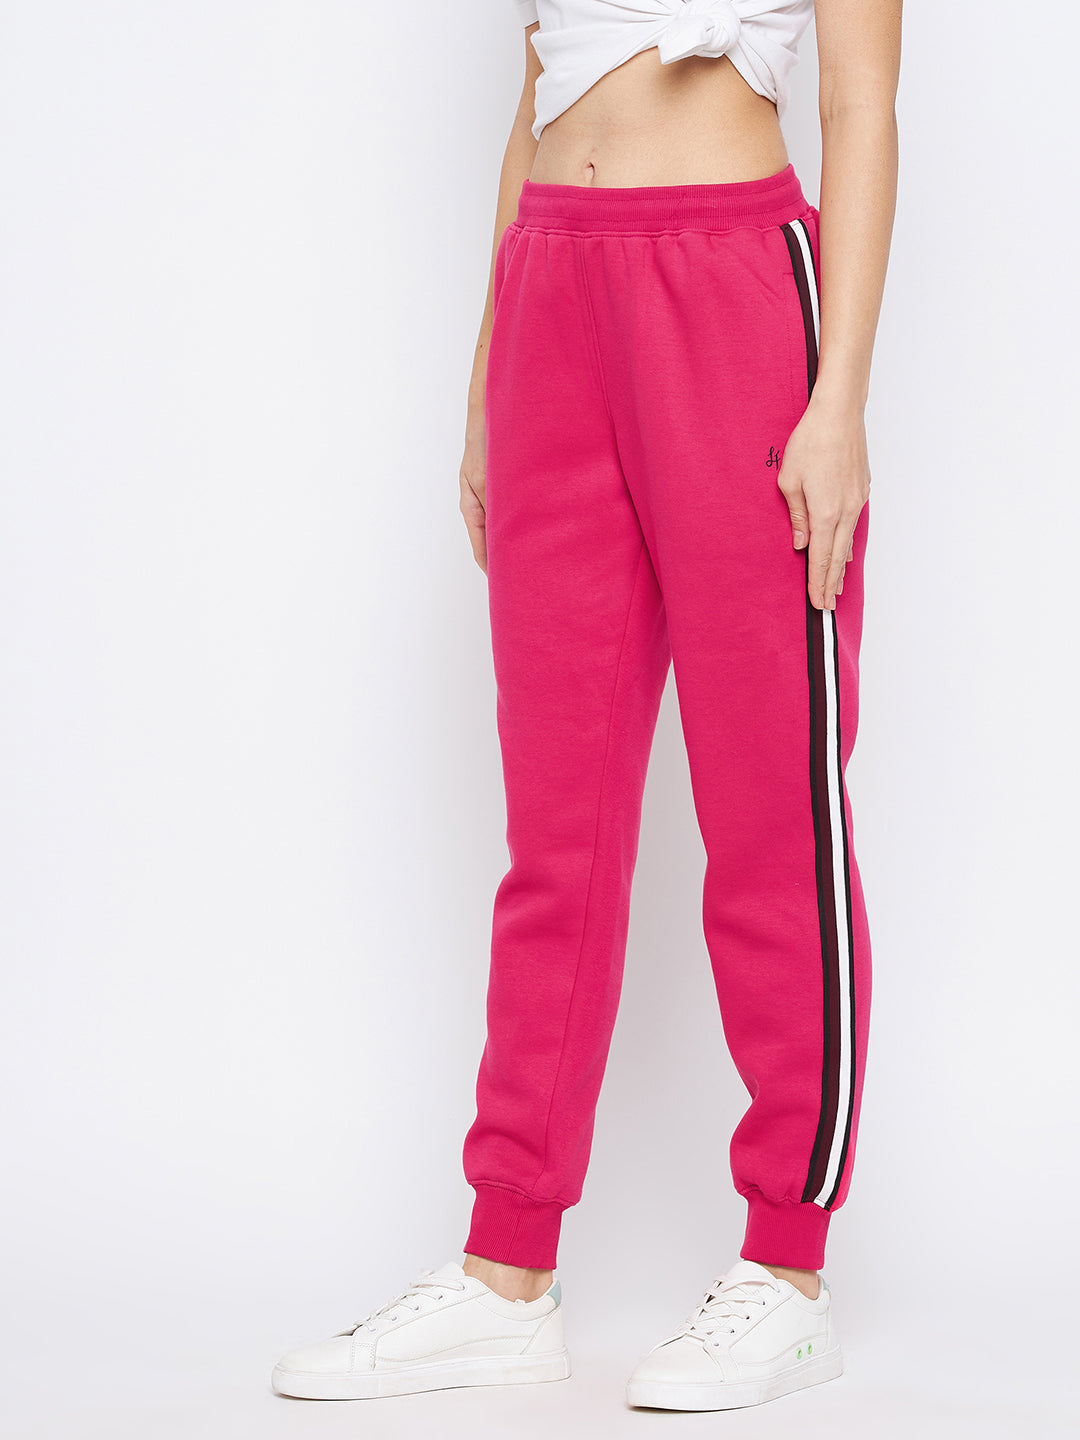 Livfree Solid Winter Jogger with fancy side Tape- Hot Pink